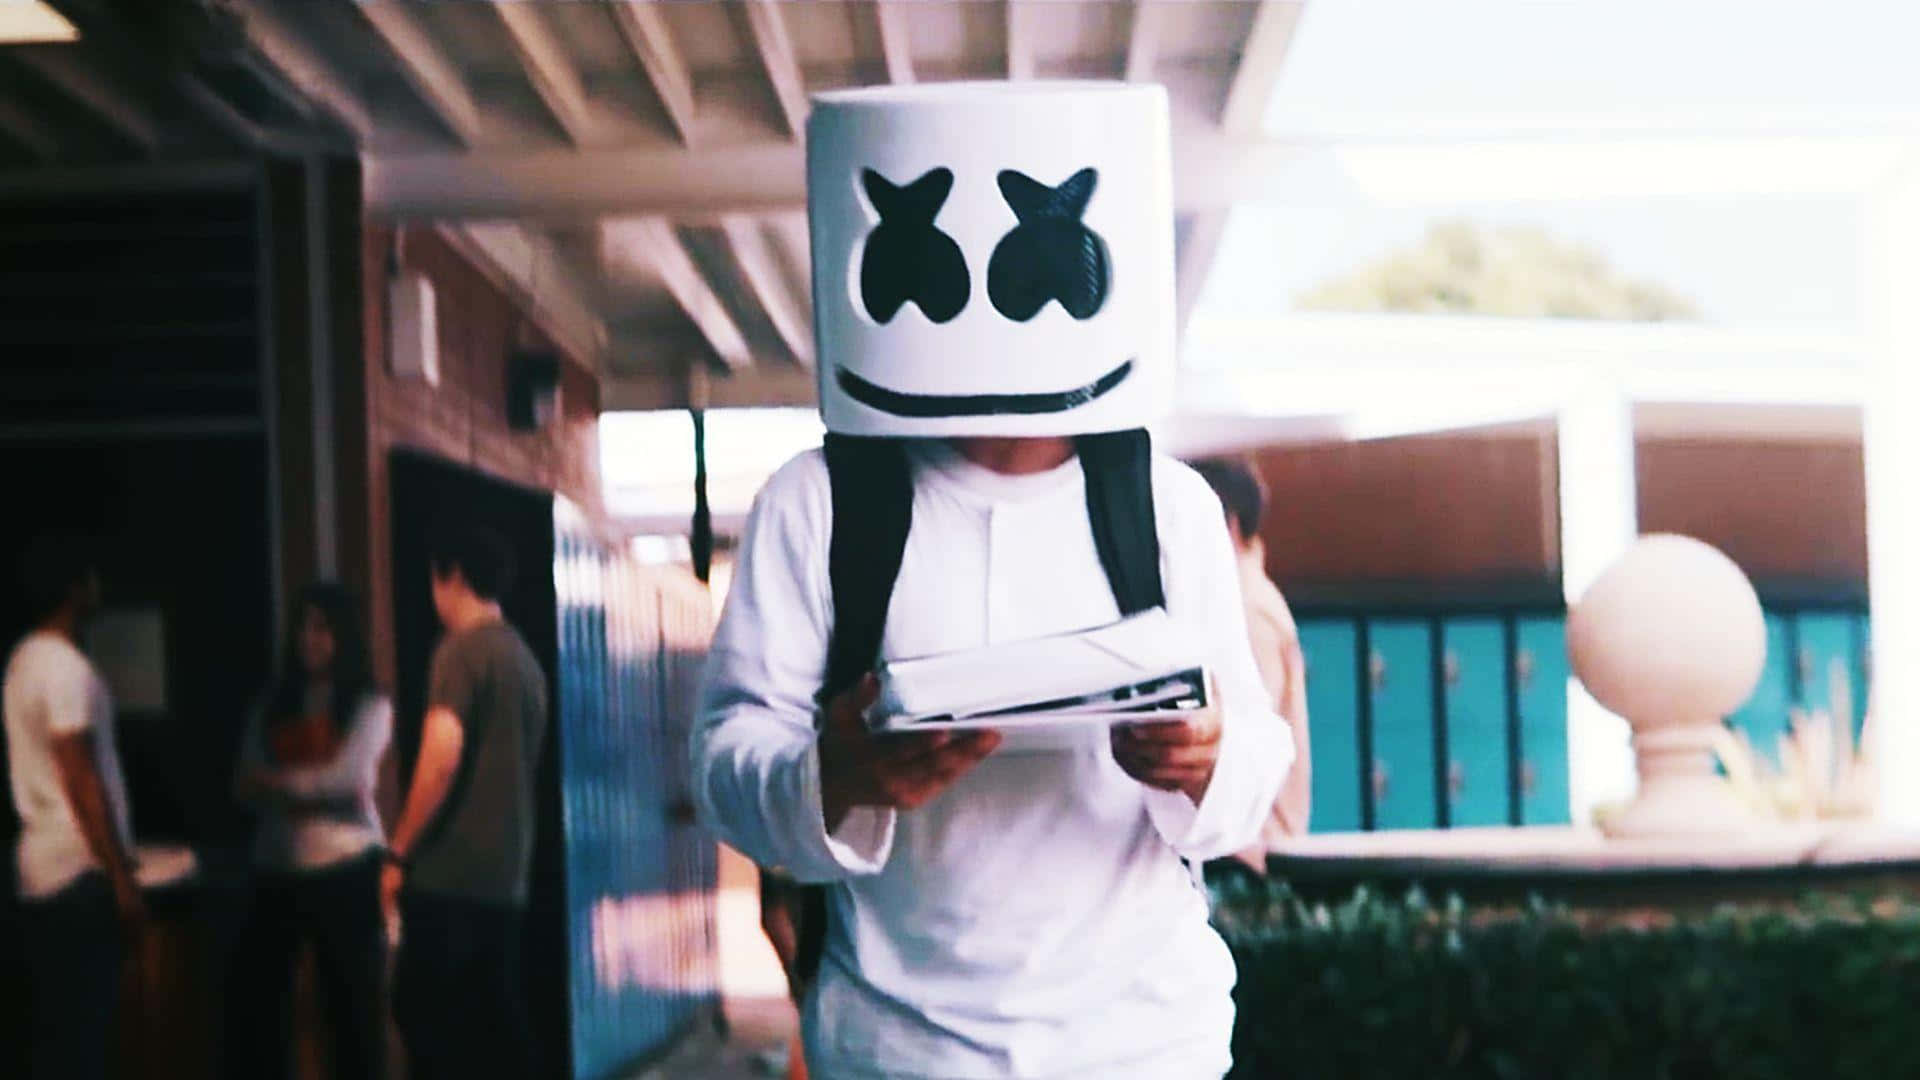 Marshmello on stage, inspiring the world with music